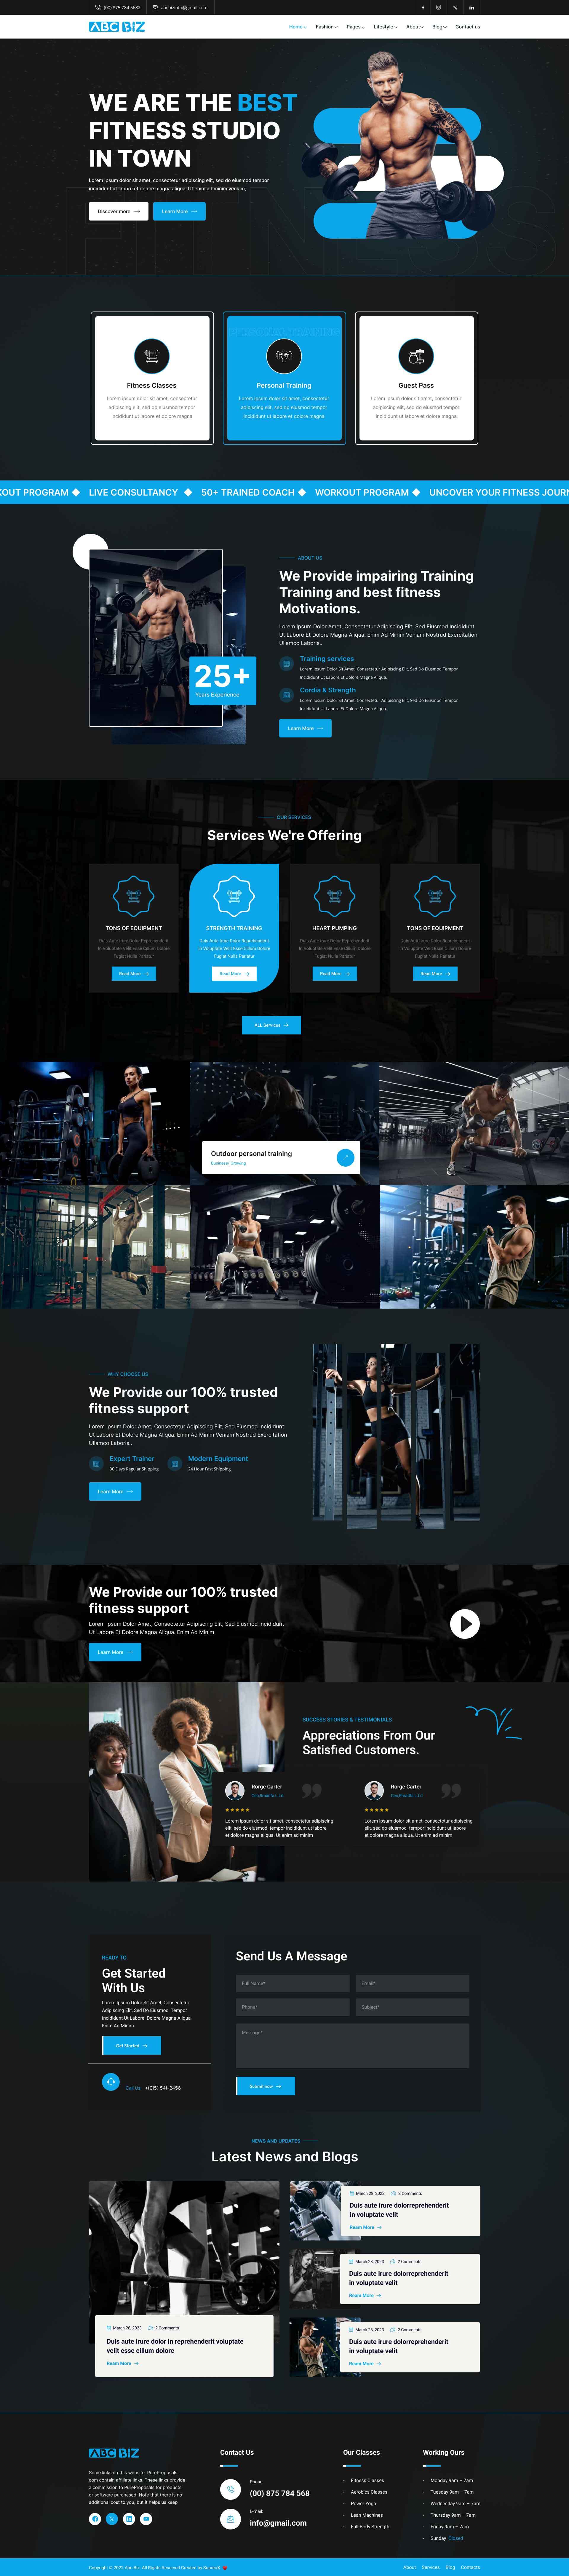 Landing Page Design For Gym With WordPress